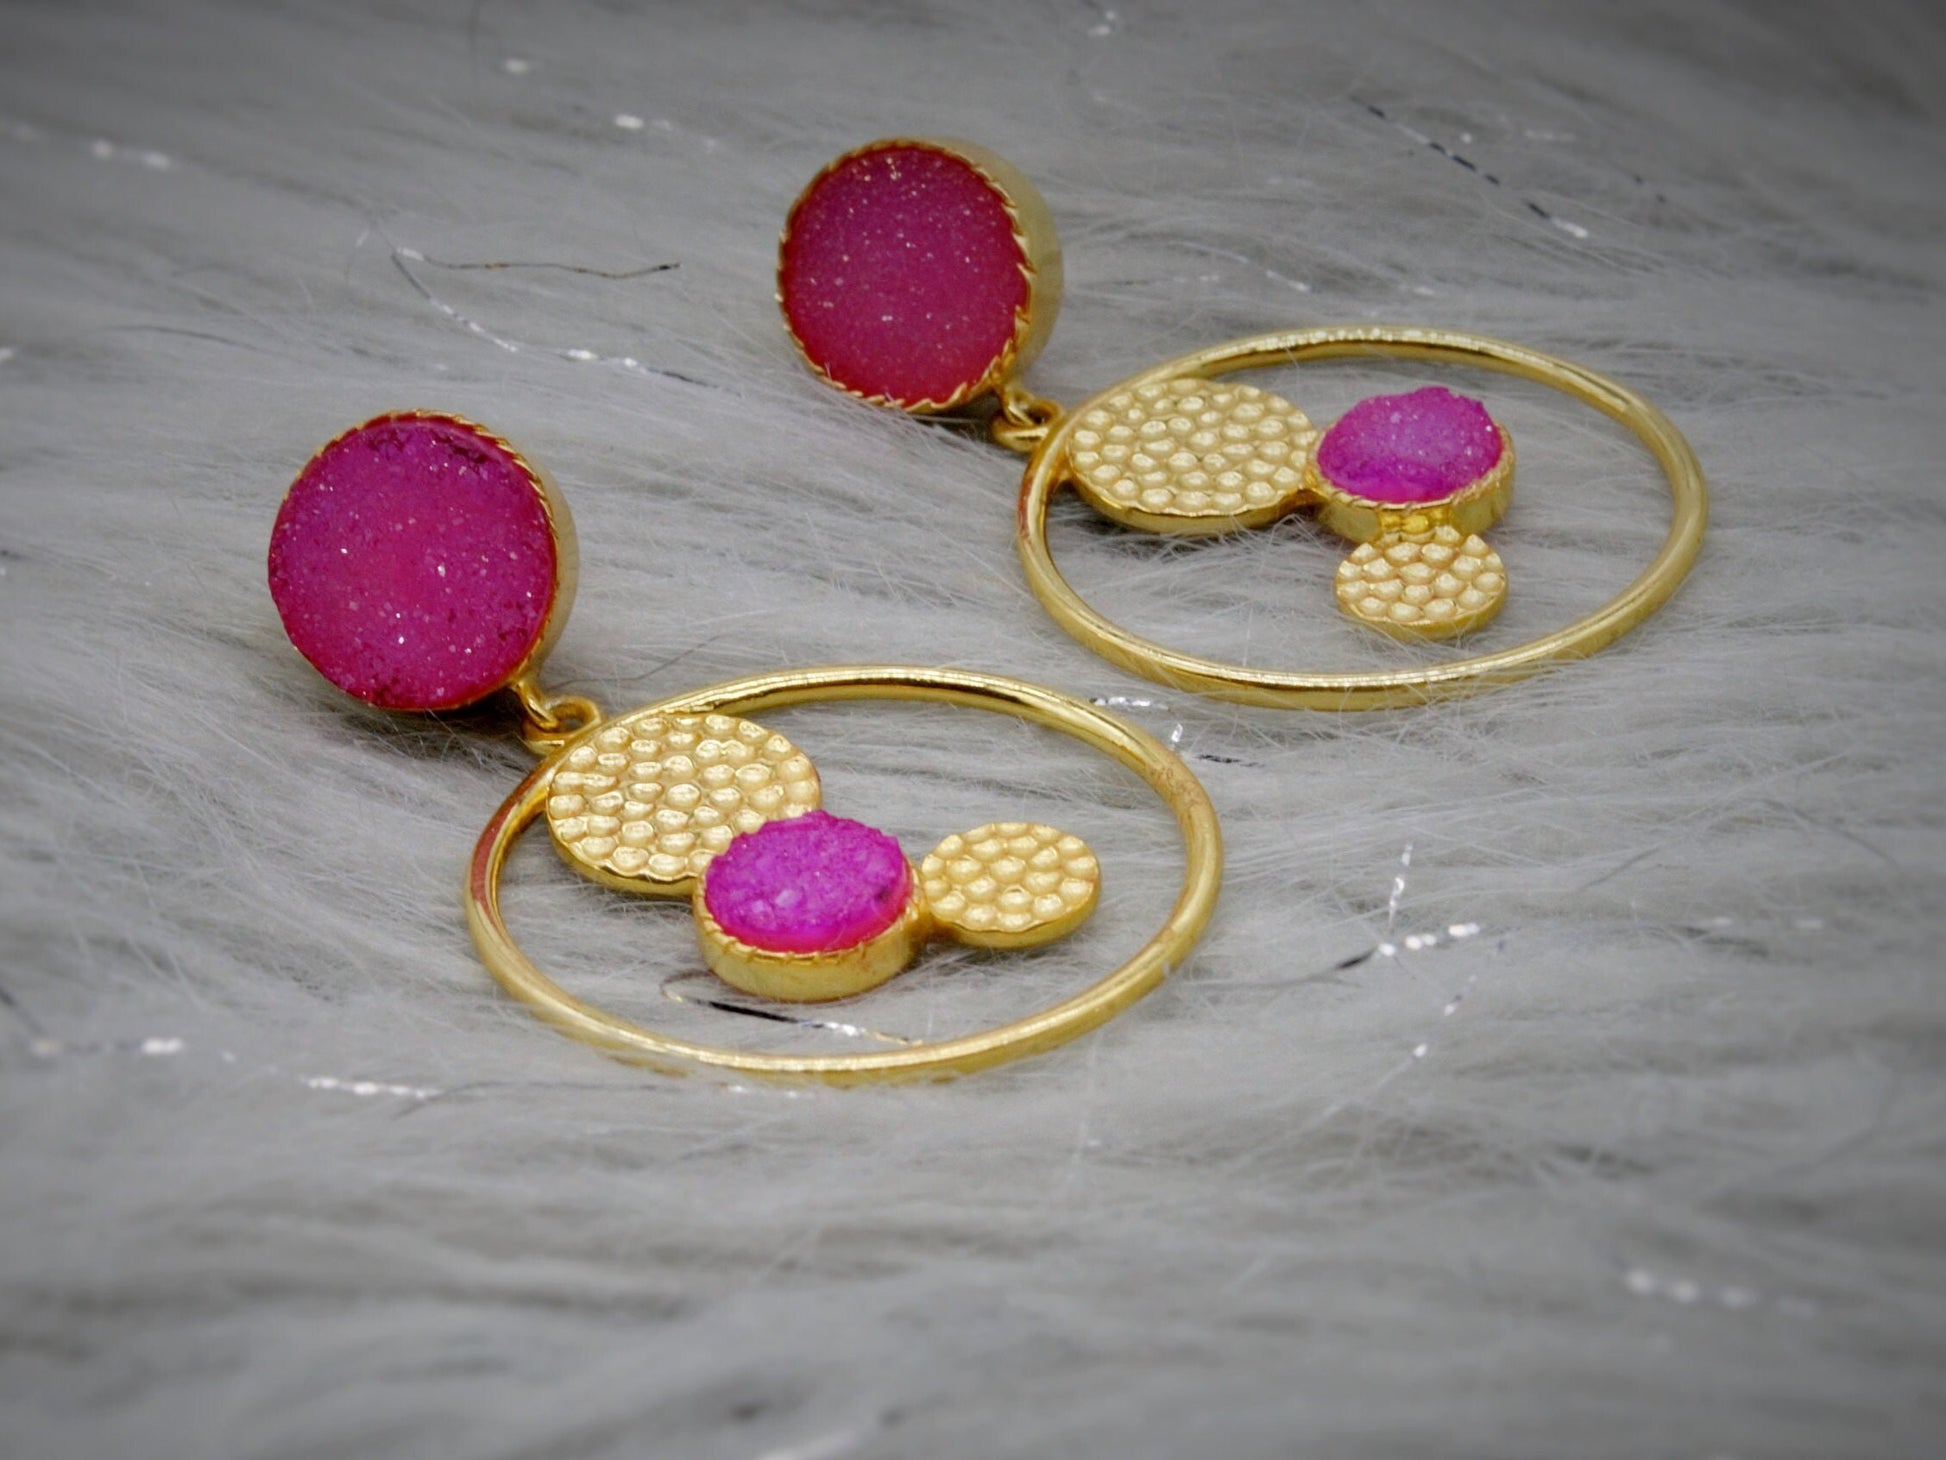 Pink Druzy Agate Gold Earrings, Gold Plated Sterling Silver Earrings, Statement Jhumka Earrings, Gift For Her, Birthday Gift